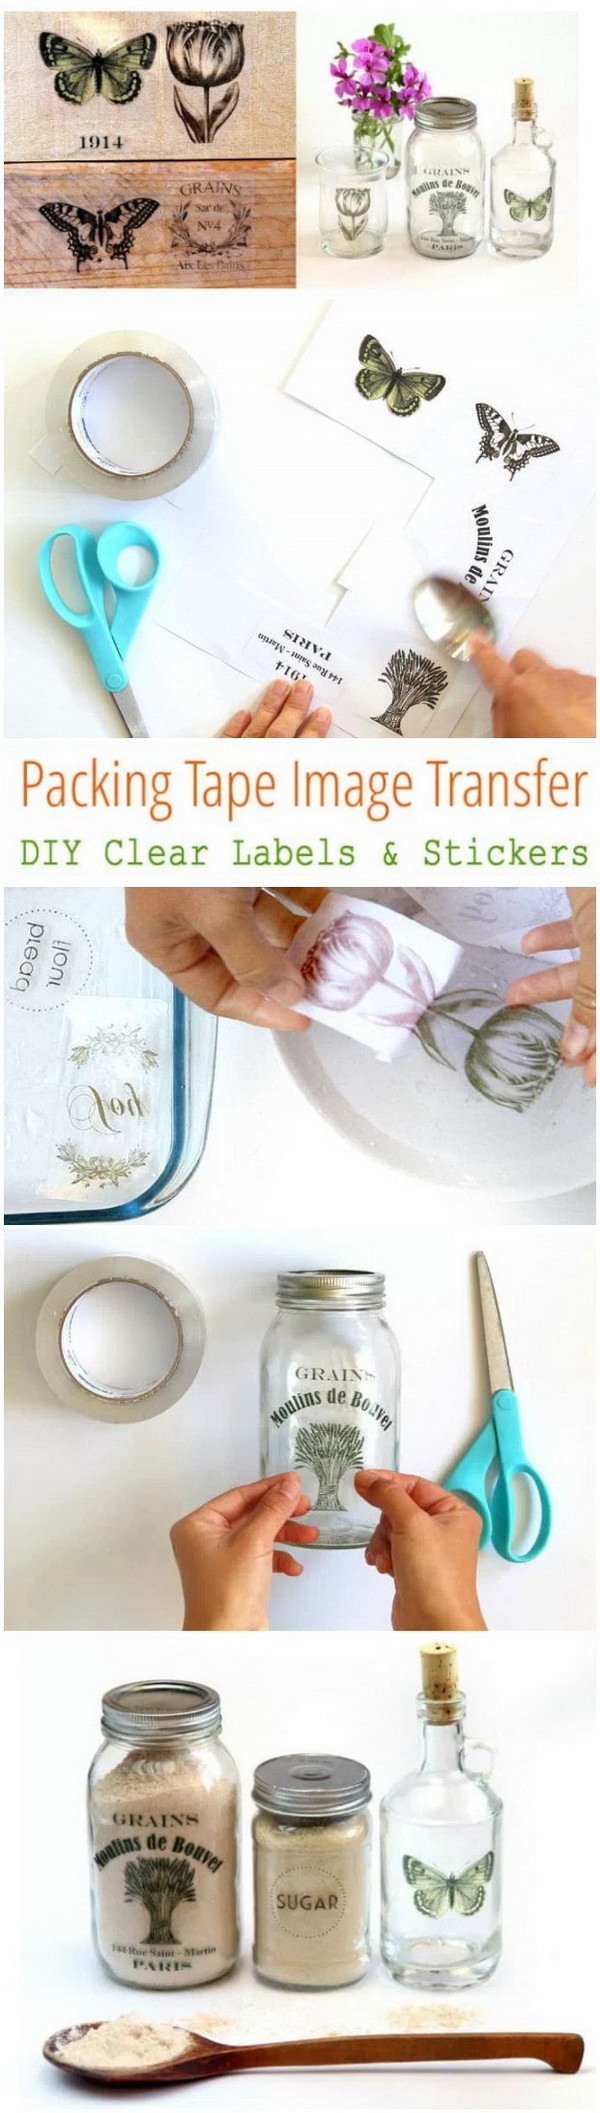 15 Nice Modge Podge Pictures On Glass Vase 2022 free download modge podge pictures on glass vase of awesome diy projects with image transfers listing more intended for diy clear labels and stickers image transfer using packing tape